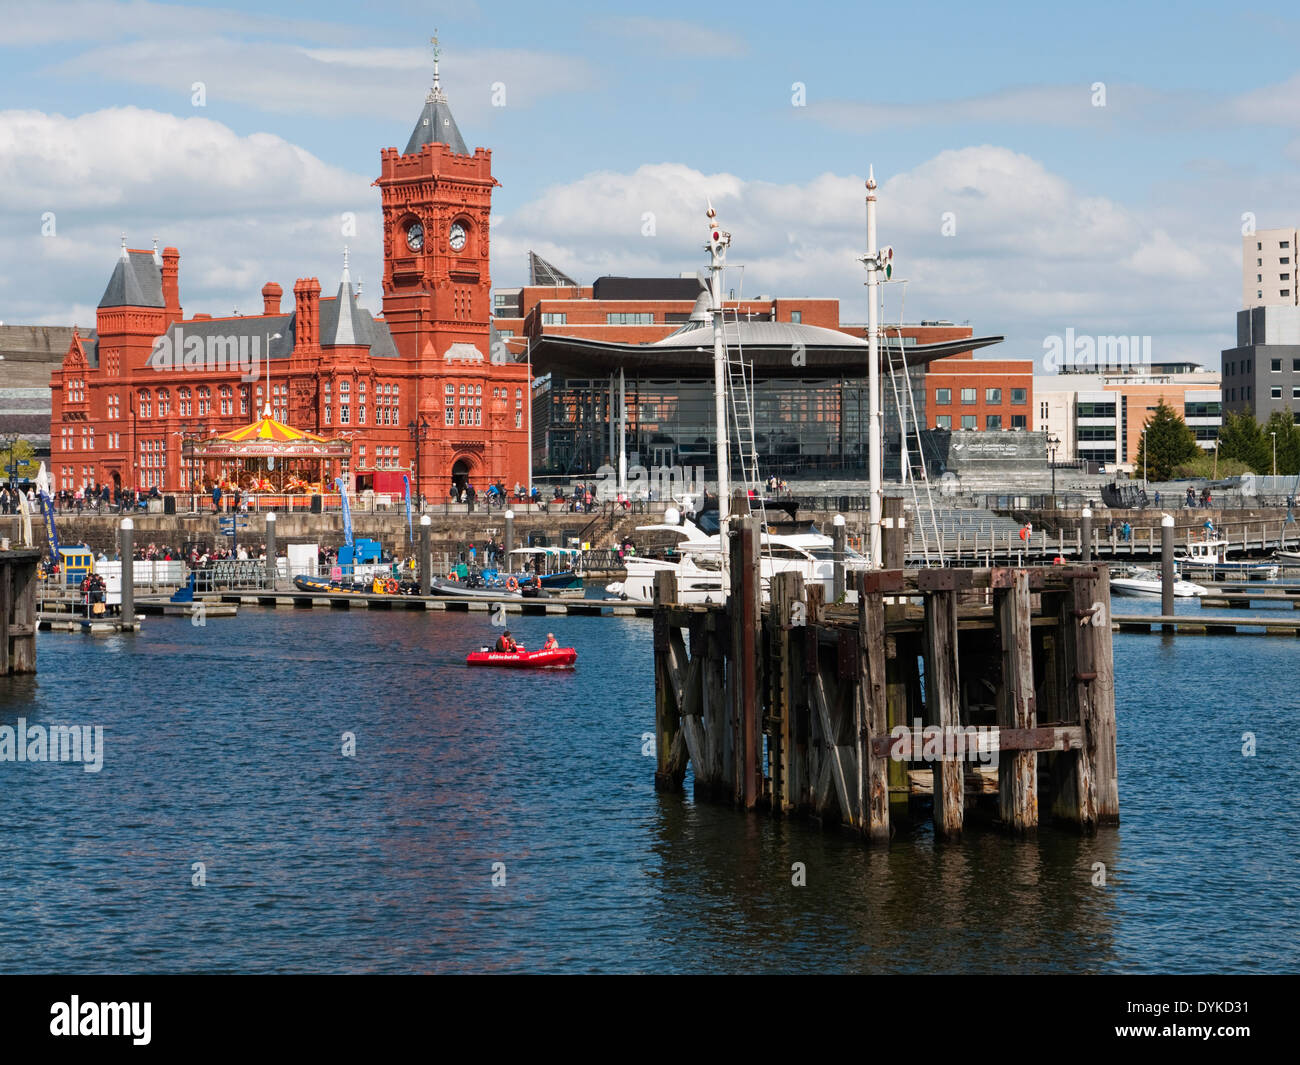 View of Cardiff Bay showing the Pierhead Building and Y Senedd (Welsh Assembly Building) Stock Photo